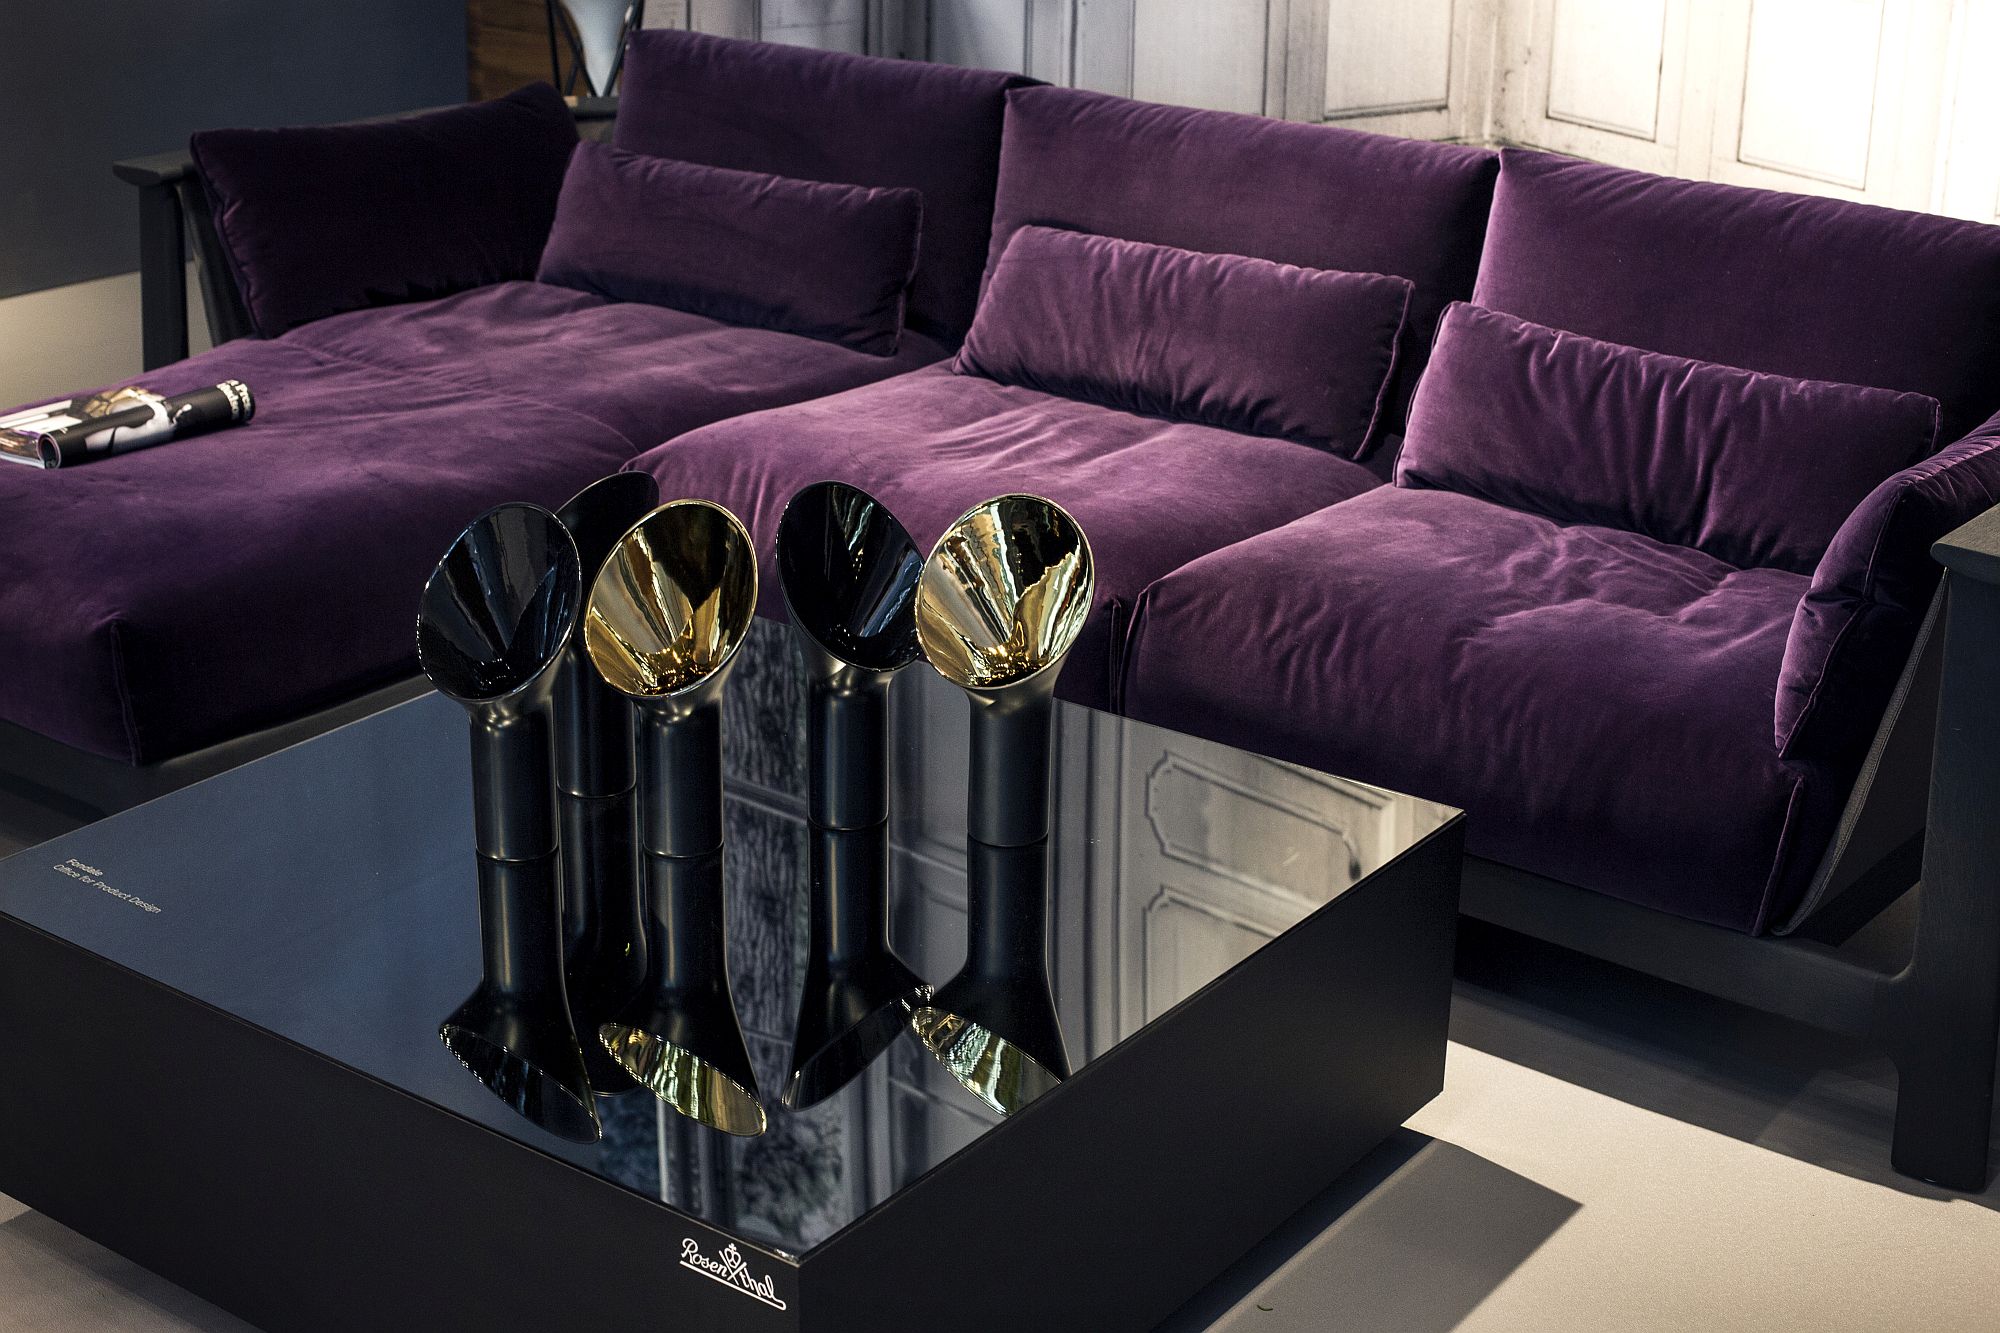 Stunning-sectional-in-purple-also-offers-modular-ease